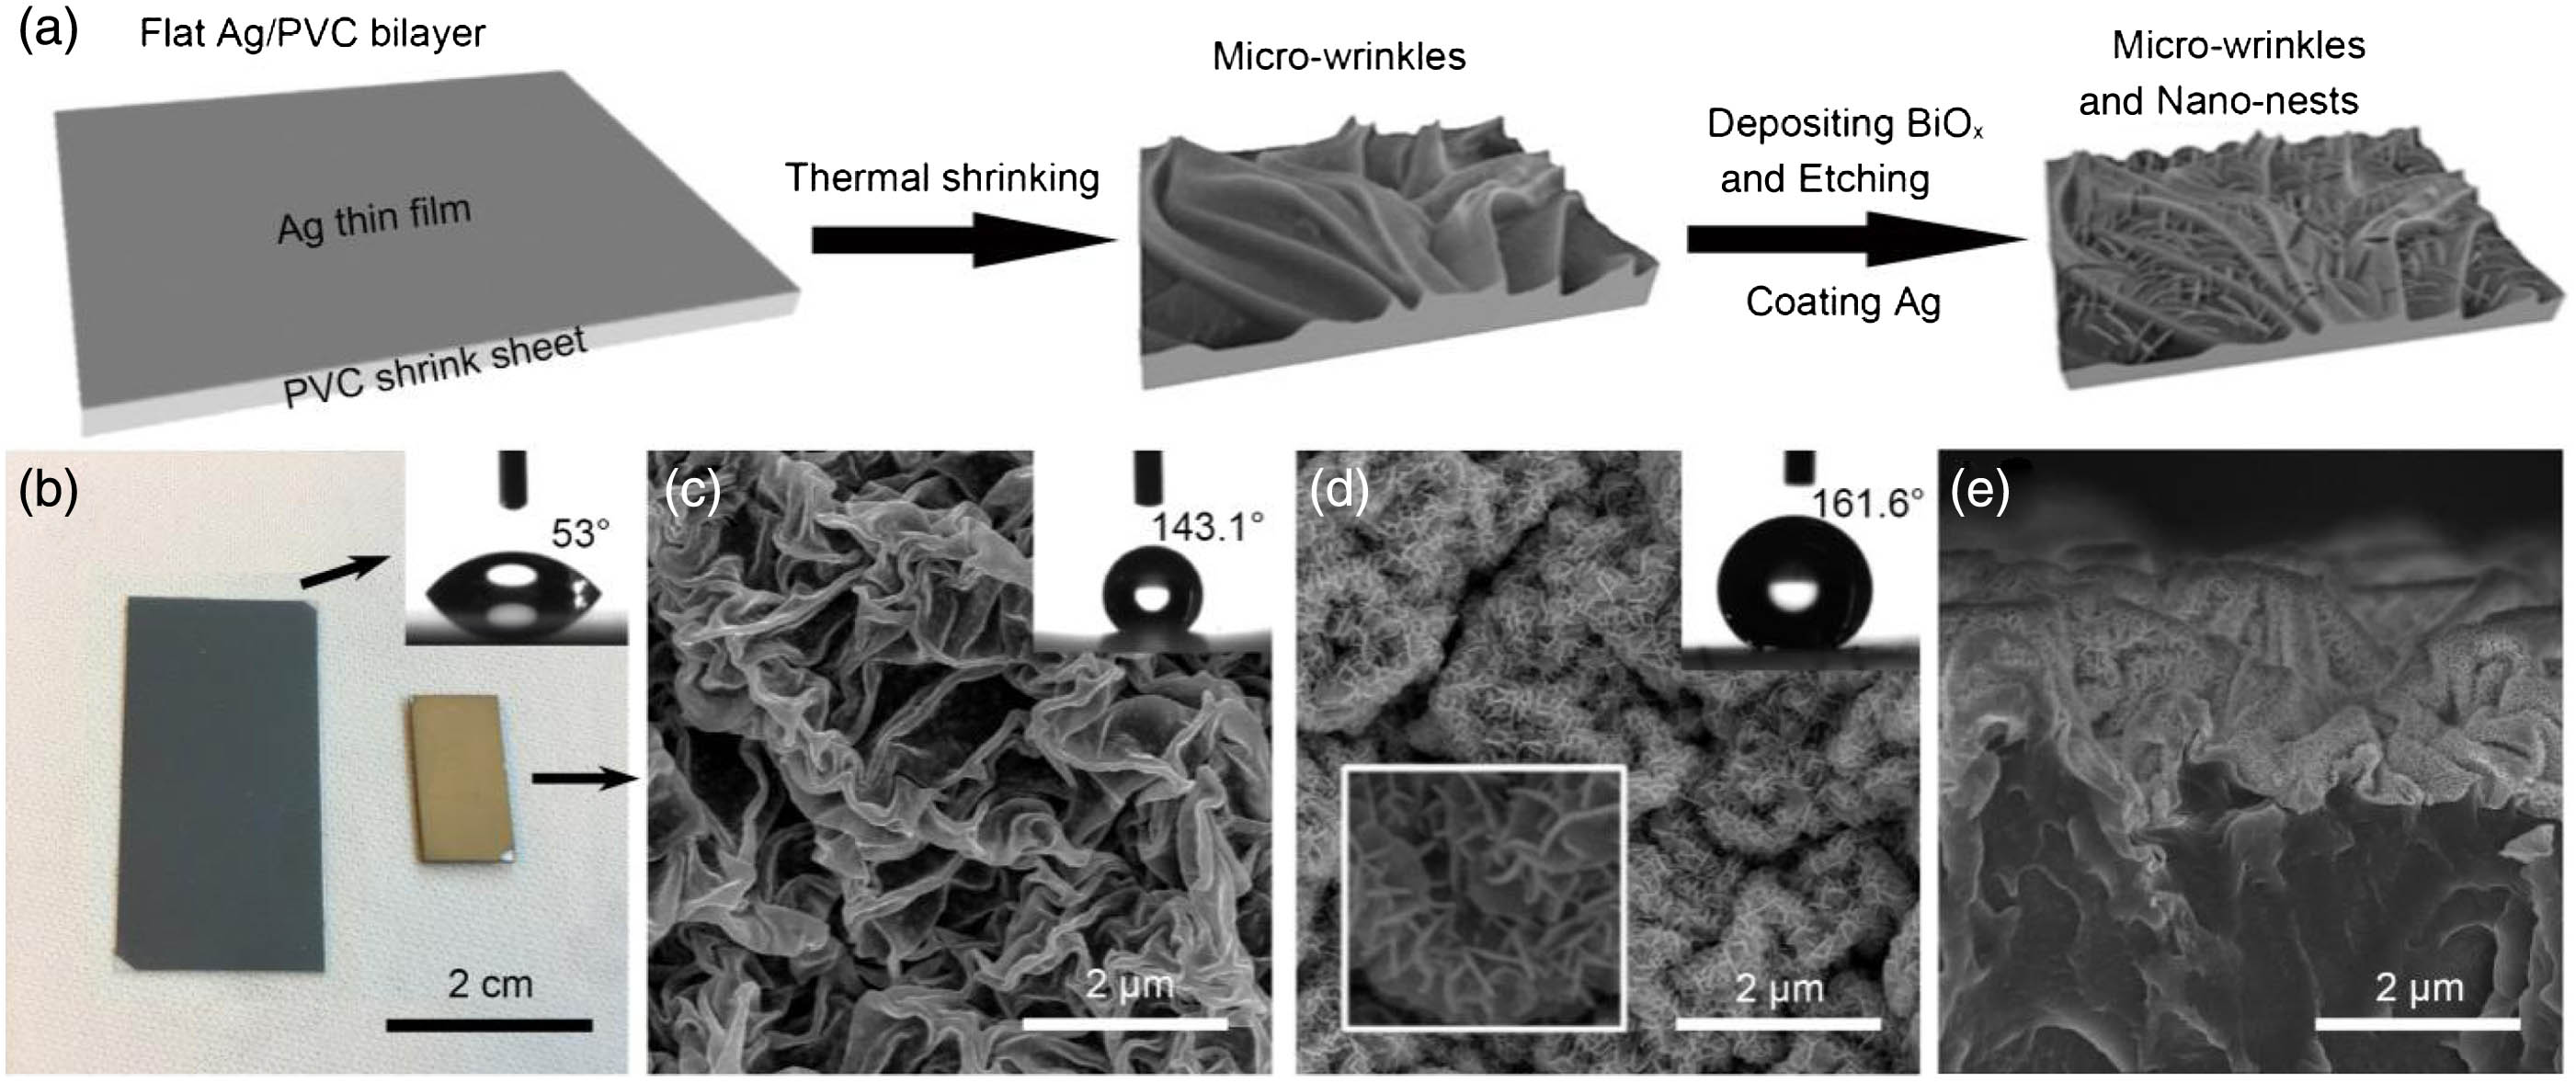 (a) Fabrication procedure of the bionic SERS chip with micro-wrinkles and nano-nests dual structure. (b) Optical photograph of Ag/PVC bilayers before (left) and after (right) thermal shrinking. Inset: CA of the flat sample. (c) SEM image of the micro-wrinkled structure. Inset: CA of the sample with micro-wrinkles. (d) SEM image of the dual structure with micro-wrinkles and nano-nests. Inset (top right): CA of the sample with dual structure. Inset (down left): magnified SEM image of nano-nests. (e) Cross-sectional SEM image of the bionic SERS chip with dual structure.